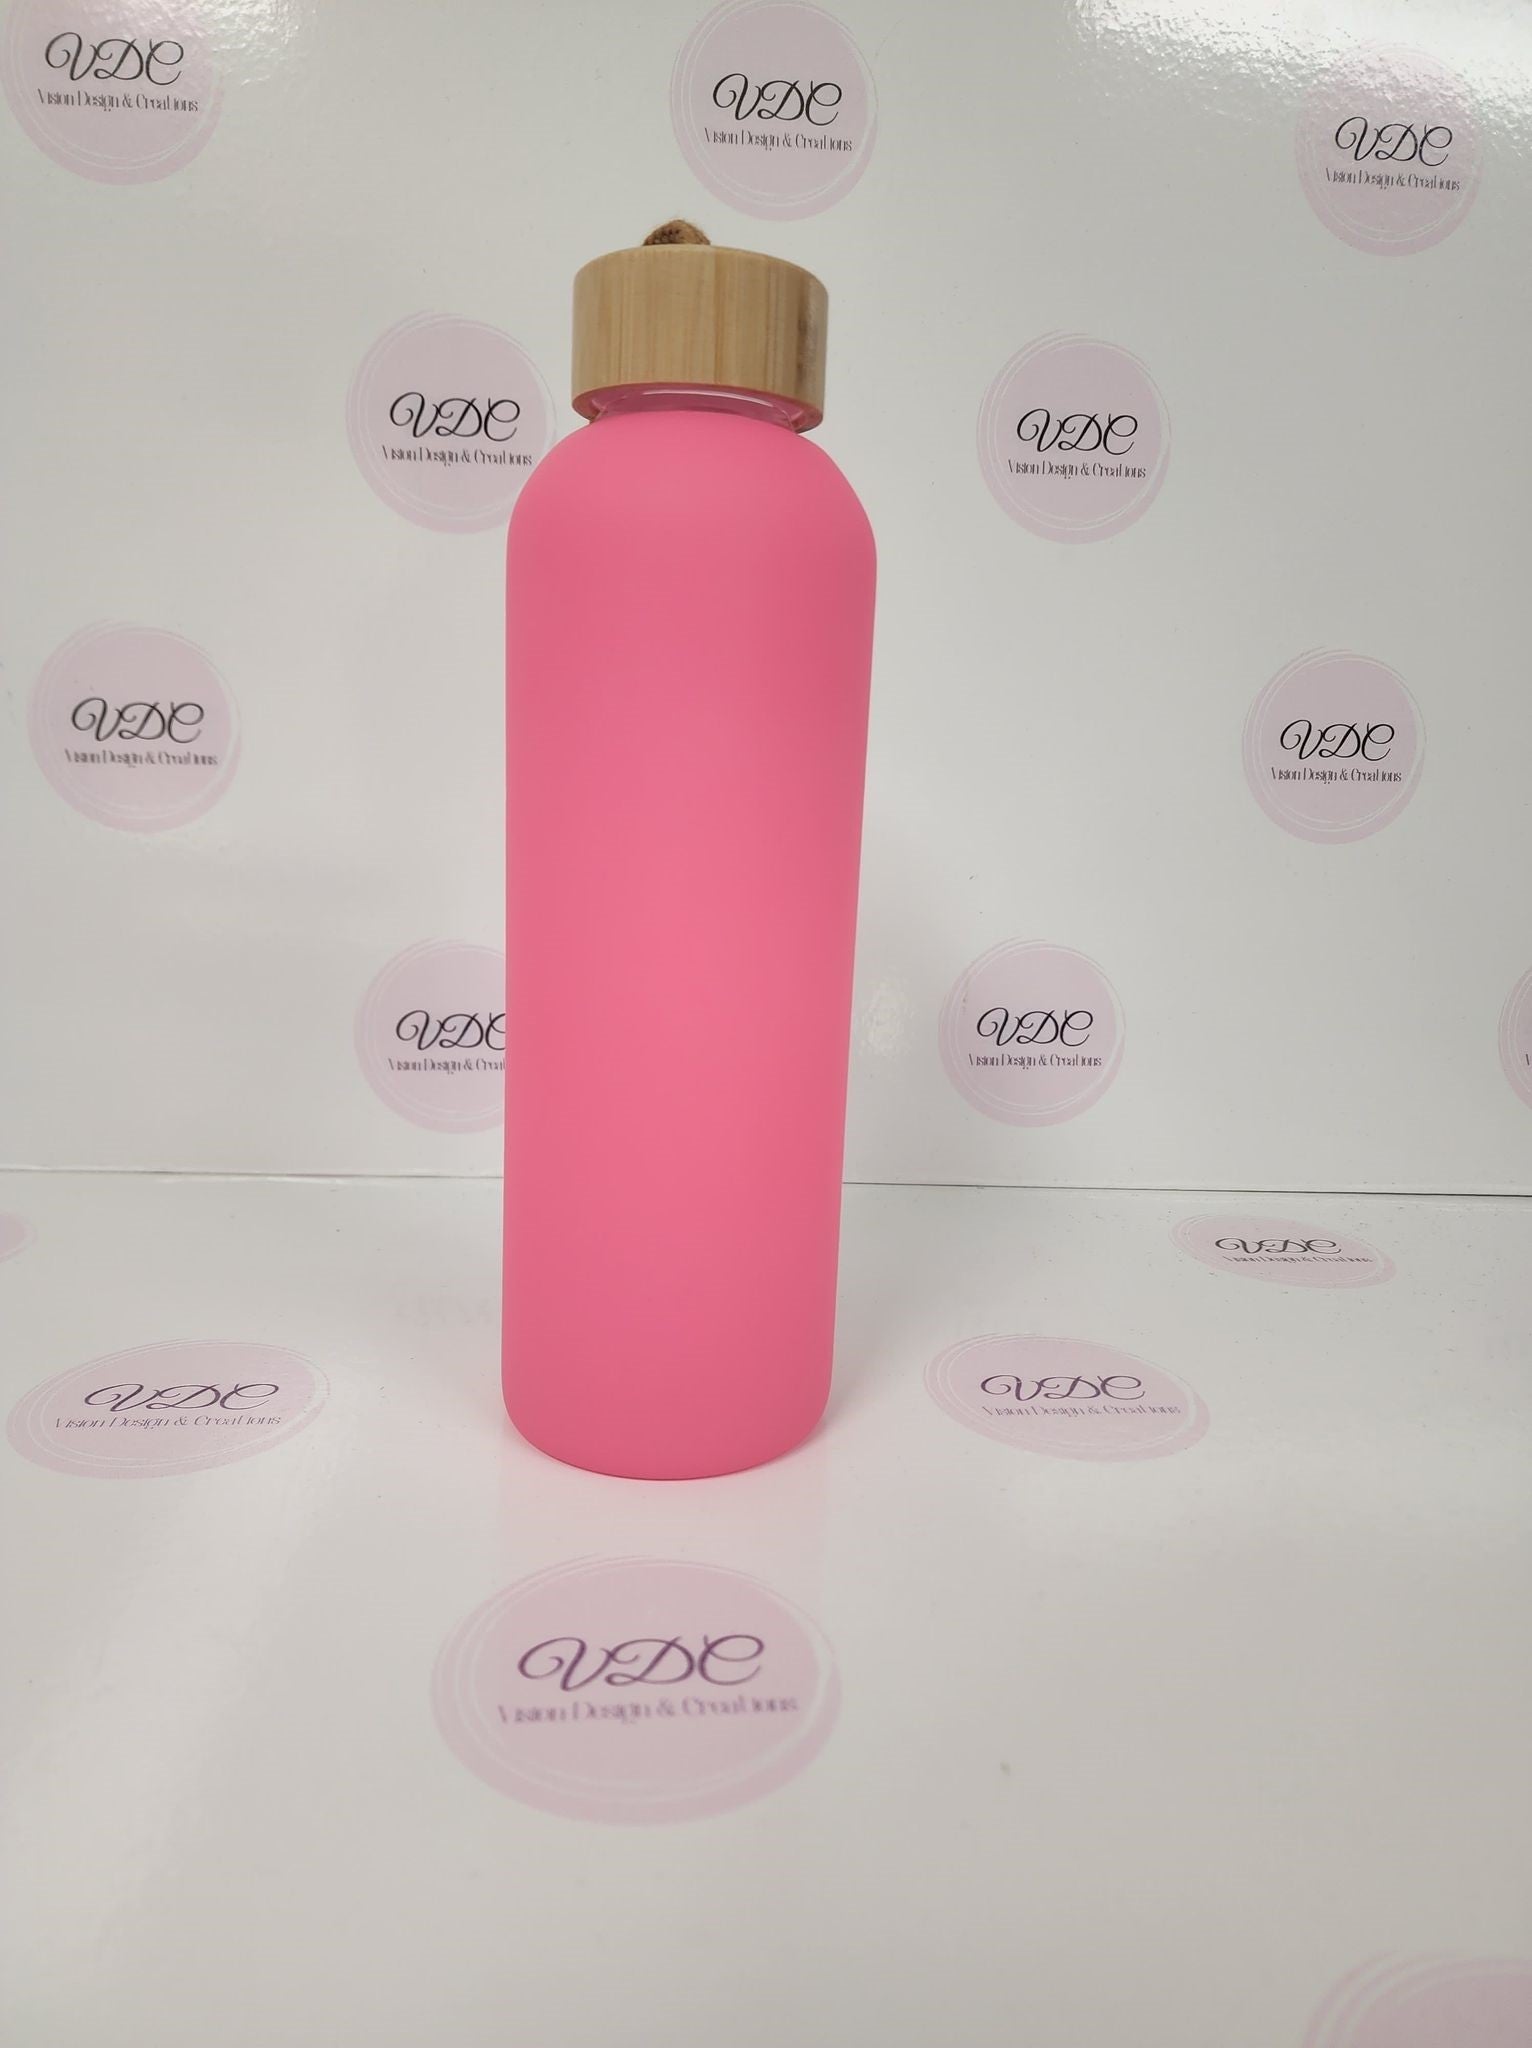 Coloured Glass Water Bottle with Bamboo Lid - 750mL (25oz) - Vision Design & Creations